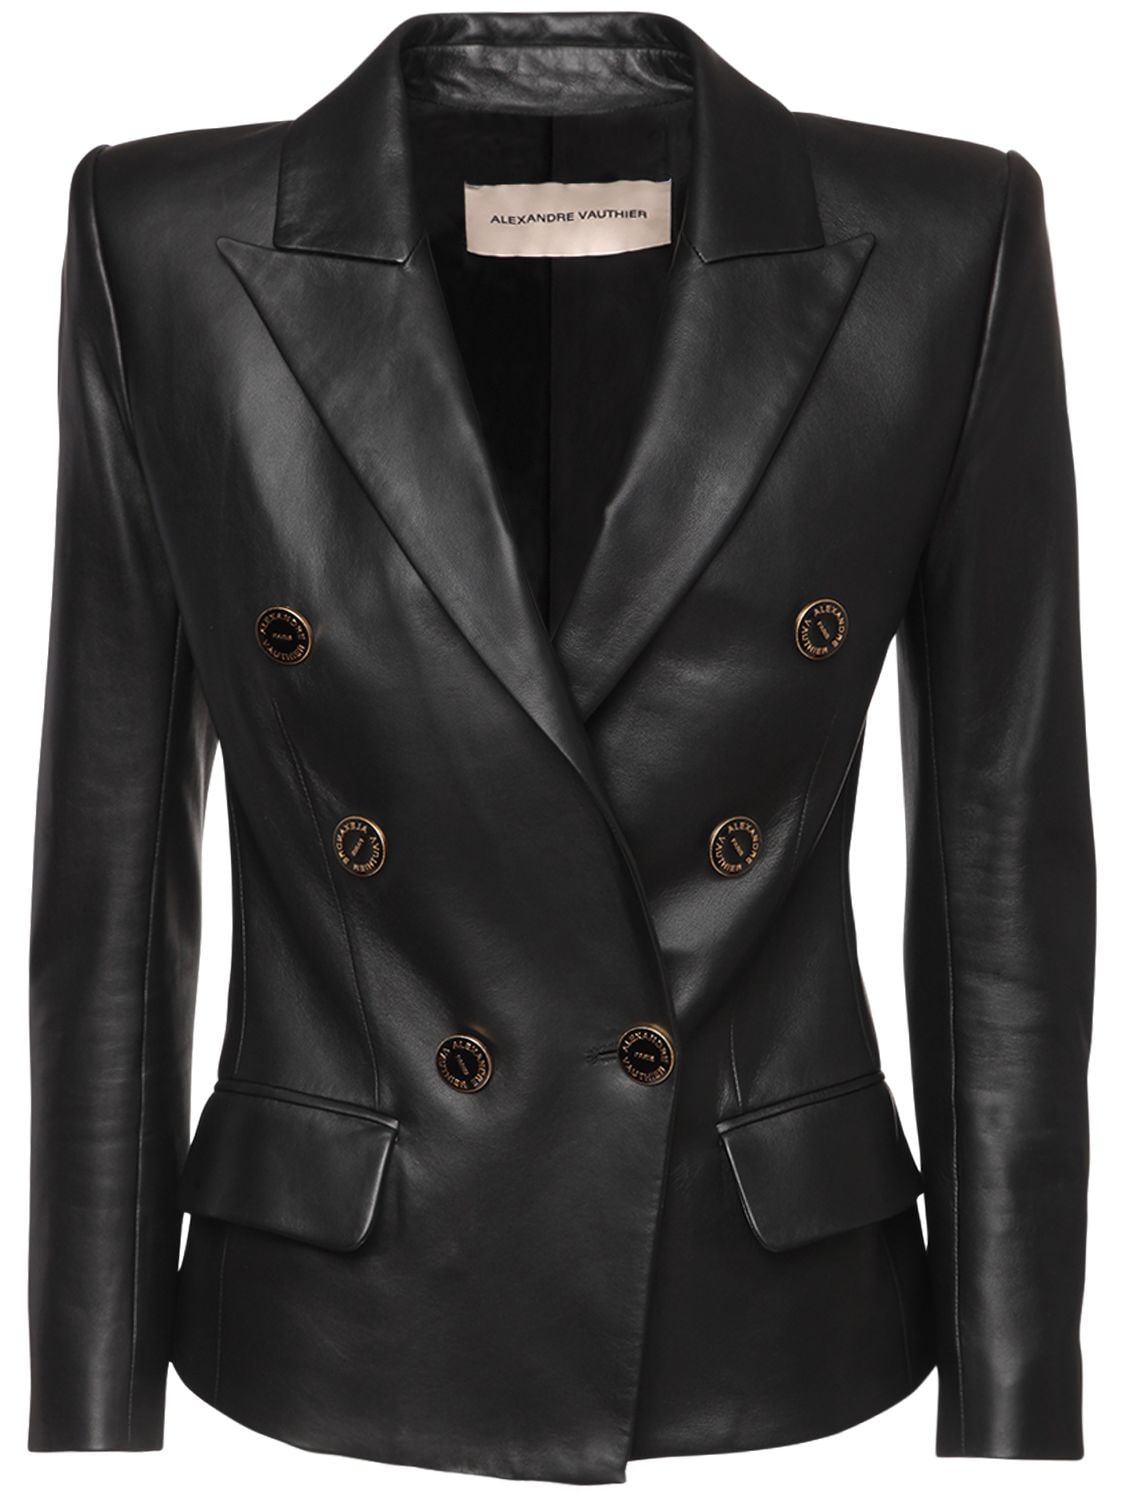 ALEXANDRE VAUTHIER DOUBLE BREASTED LEATHER BLAZER,72I5BH053-QKXBQ0S1